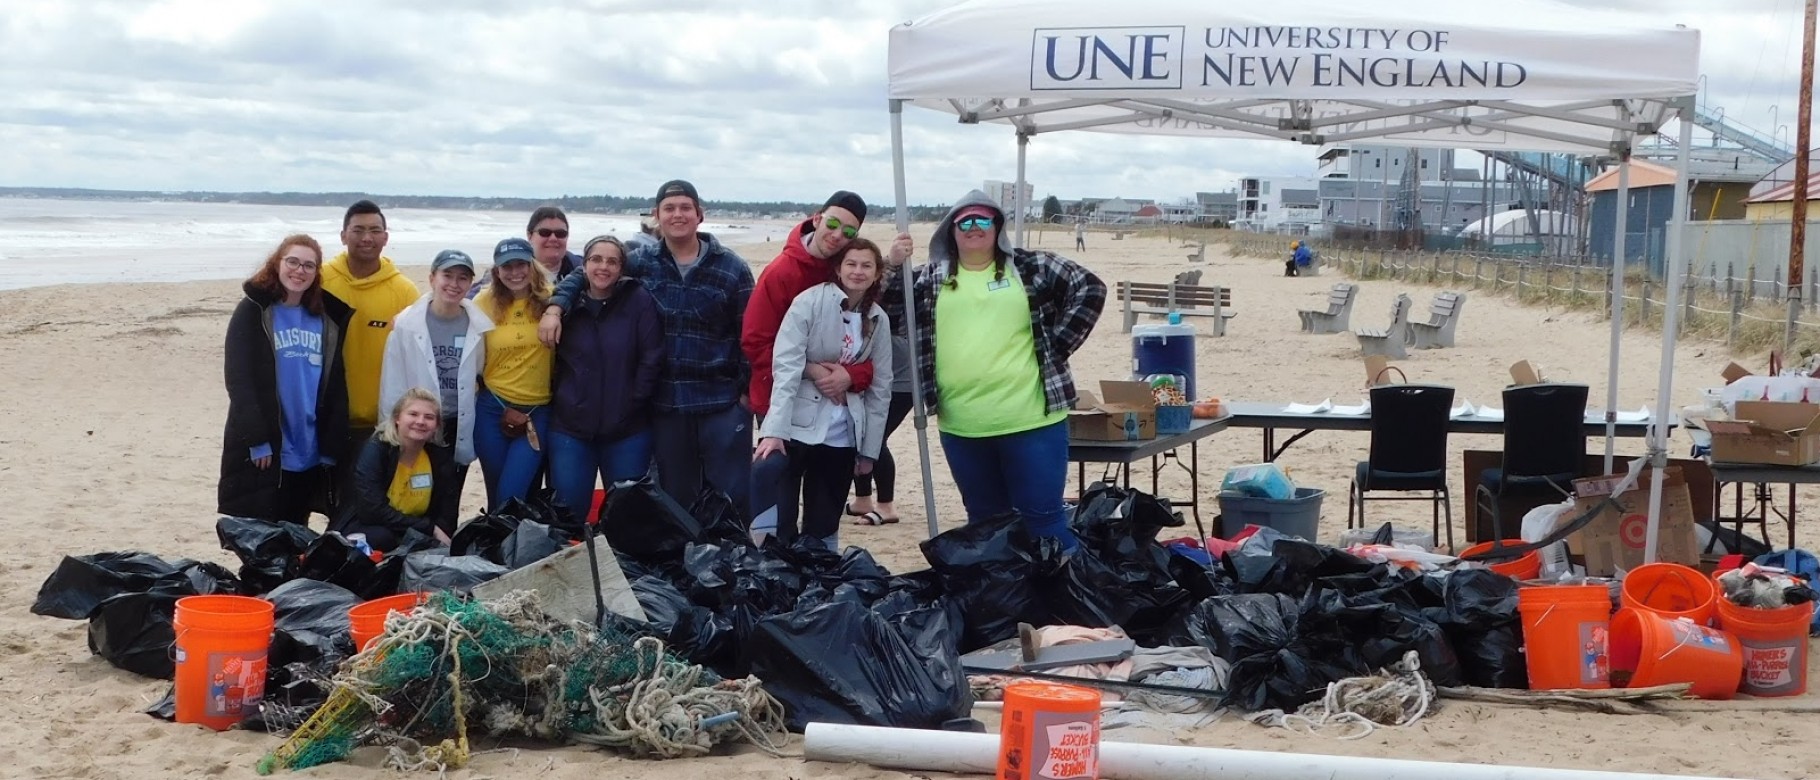 A UNE-led team of volunteers cleared 500 pounds of trash off the beach in Old Orchard Beach